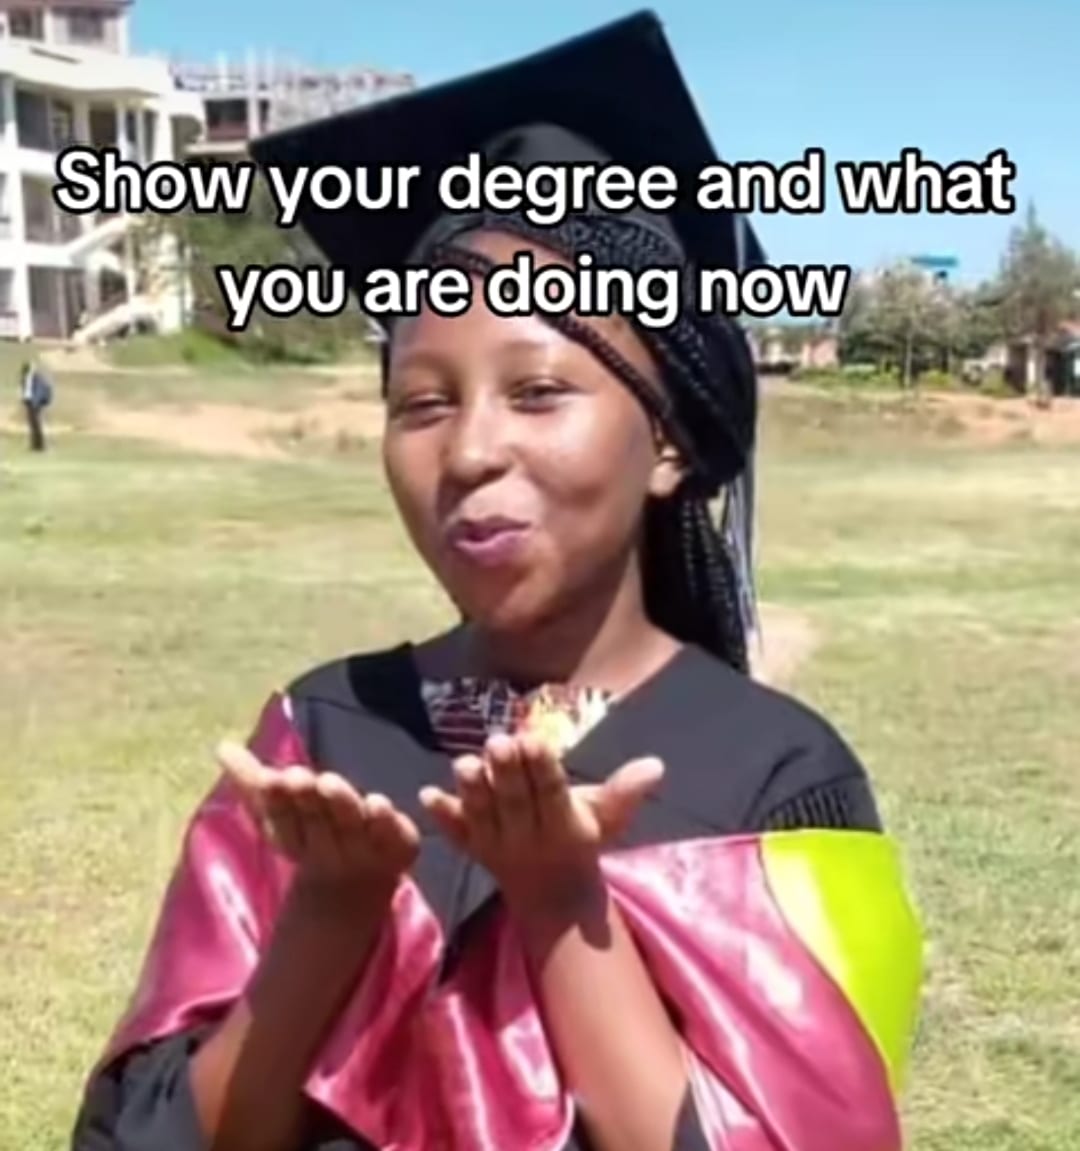 "Madam abeg, cut am into 15 pieces" - Social media erupts as lady flaunts university degree vs. what she's currently doing